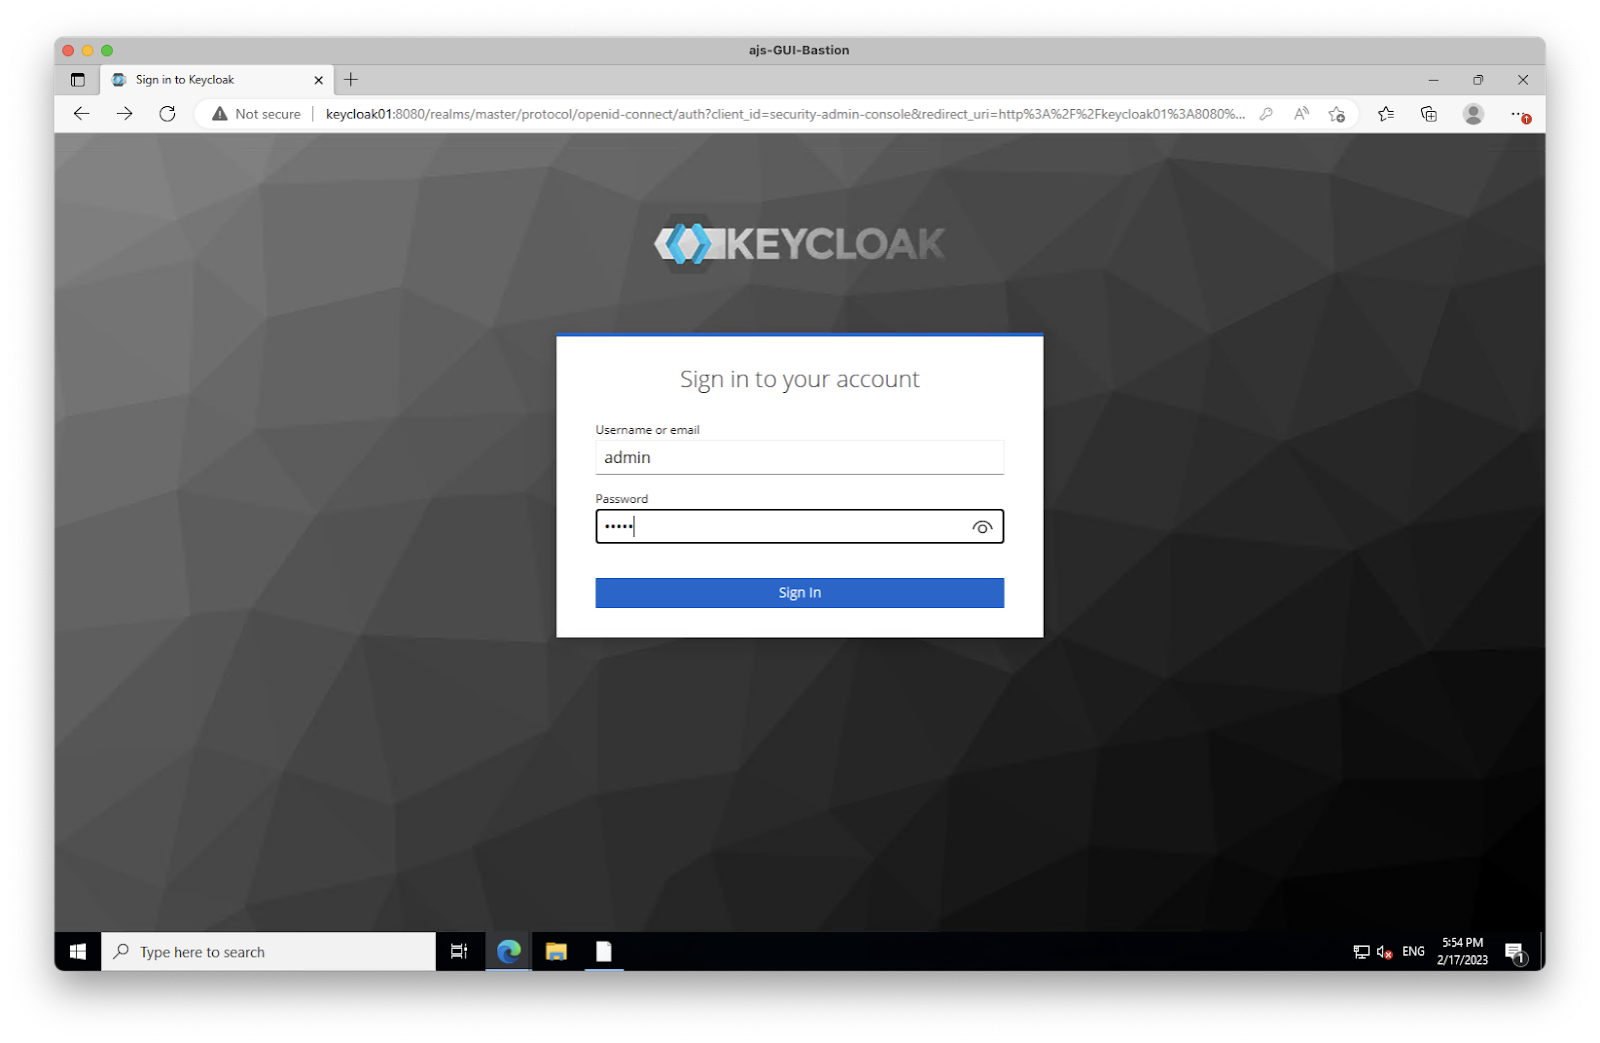 ajs-GUl-Bastion 
Sign in to Keycloak 
C A Not secure I keycloak01:8080/realms/master/protocol/openid-connect/auth?client_id=security-admin-console&redirect_uri=http%3A%2F%2Fkeycloak01%3AE 
«DKEYCLOAV 
Sign in to your account 
Username or email 
admin 
Password 
.....l 
Sign In 